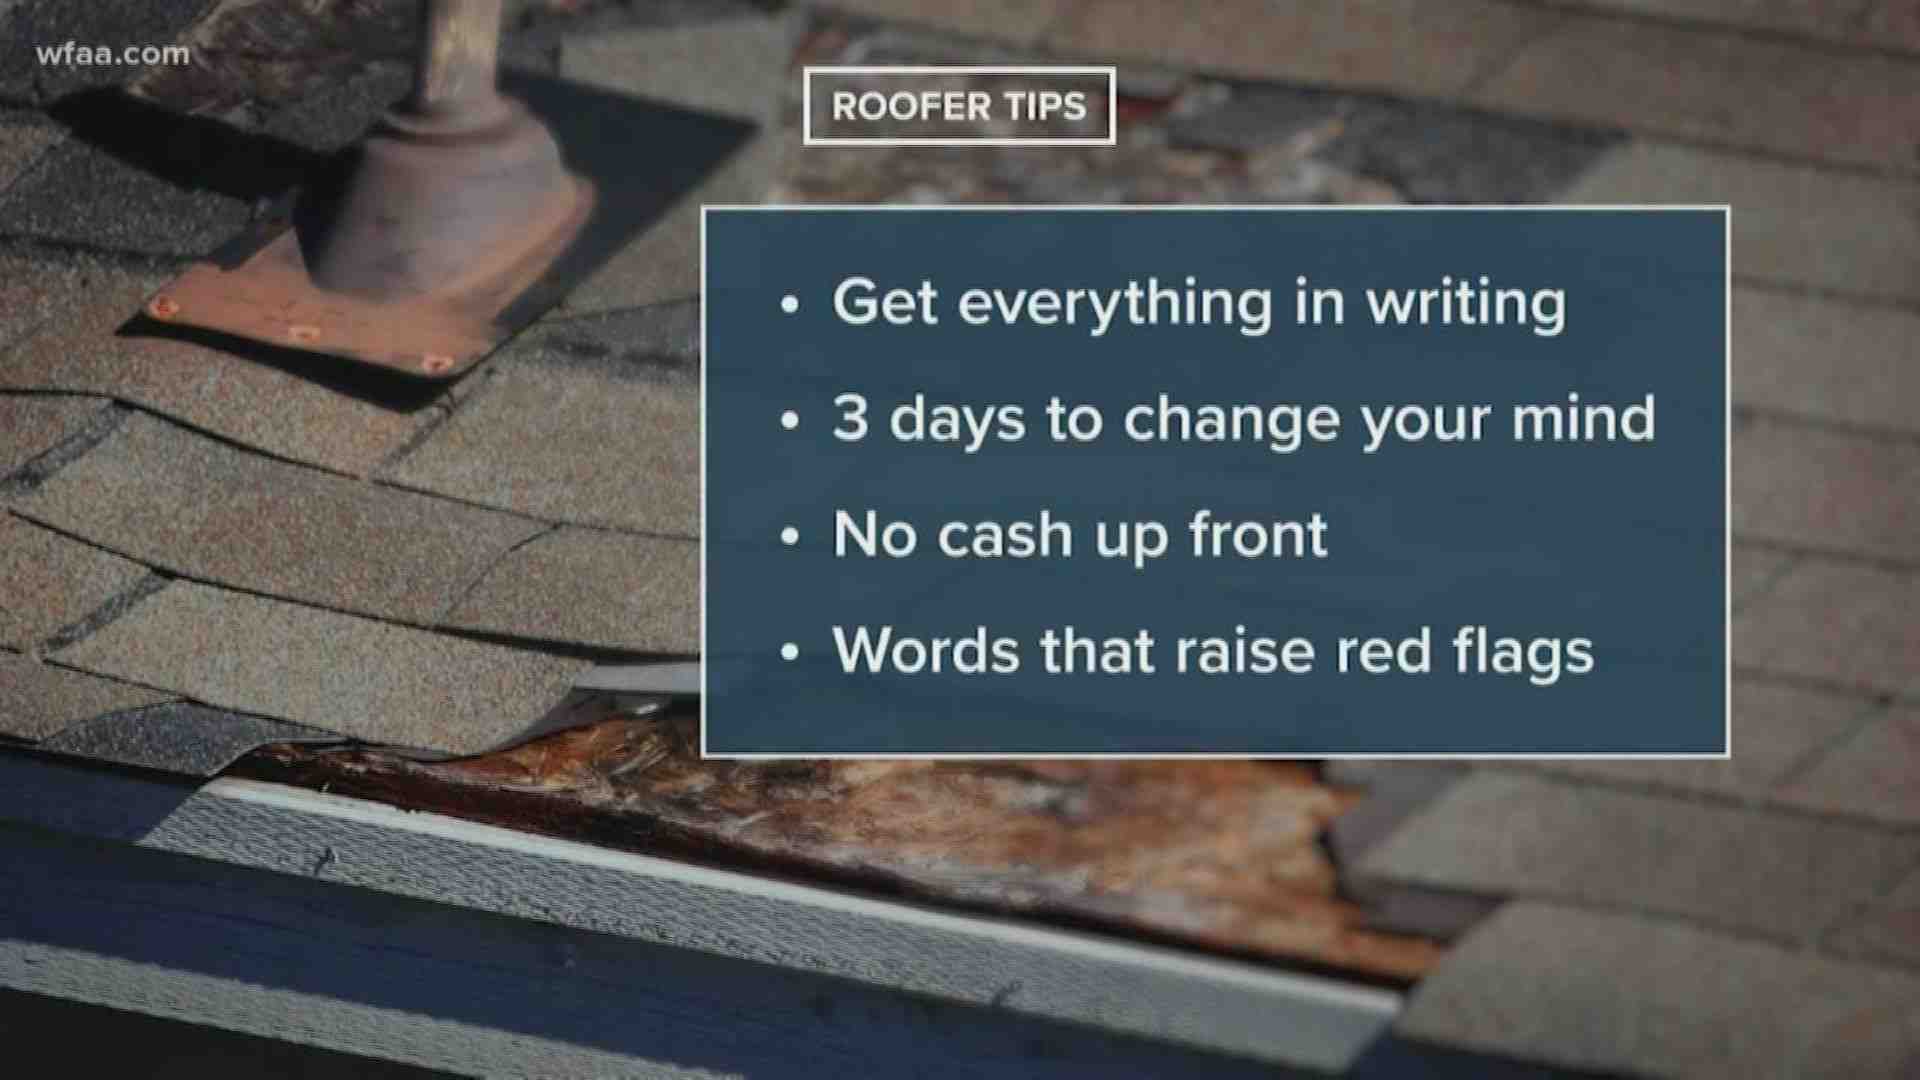 What to know before hiring a roofer?